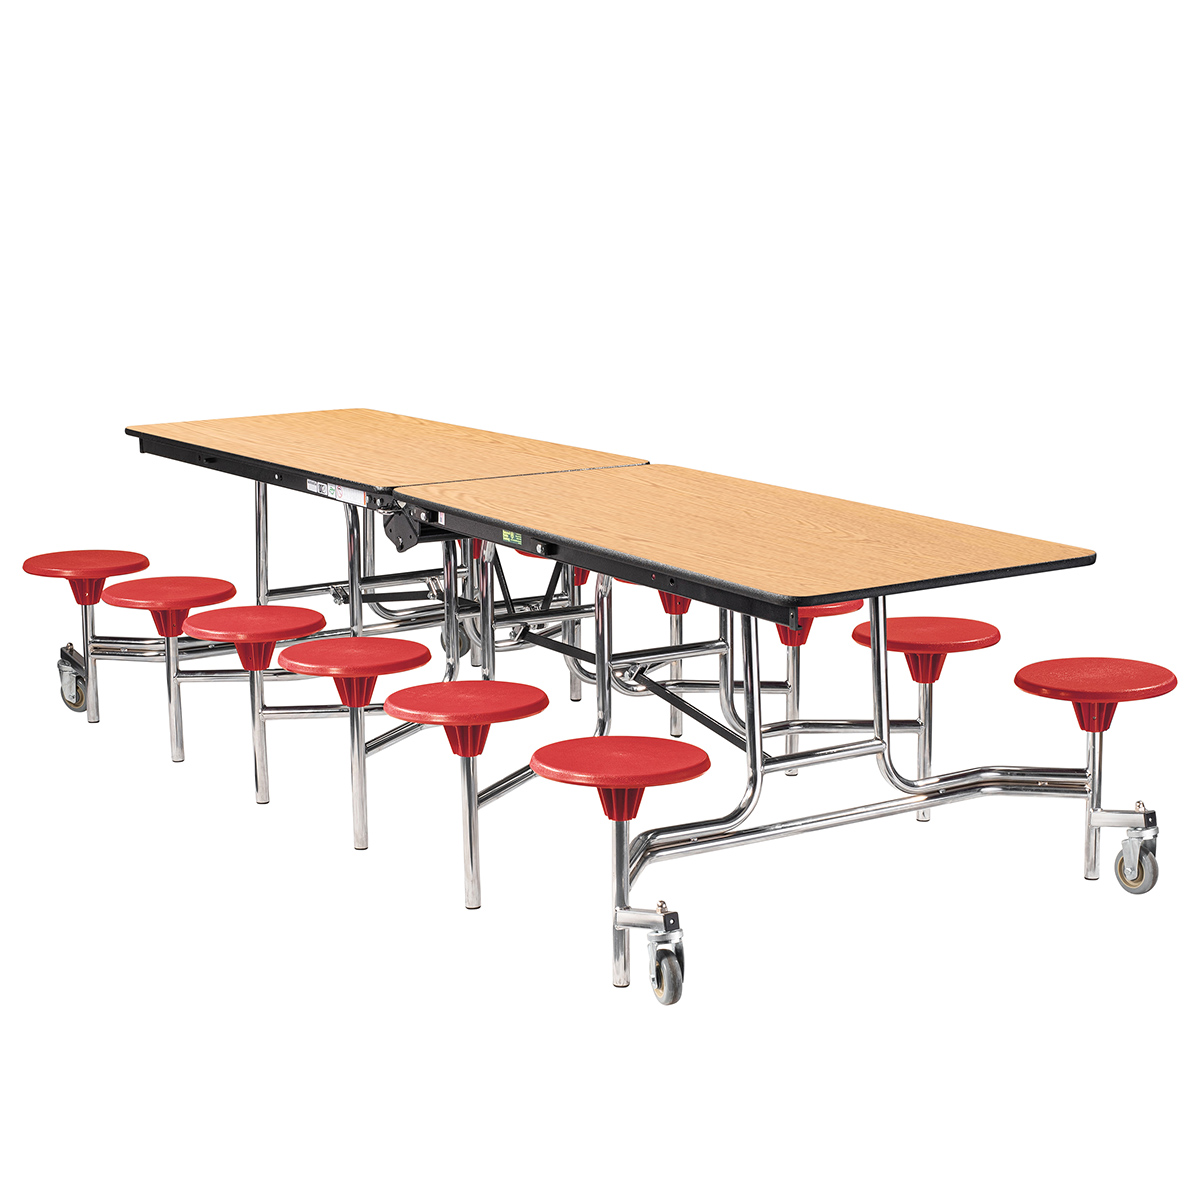 NPS 10′ Mobile Stool Cafeteria Table, MDF Core, Protect Edge, Chrome Frame